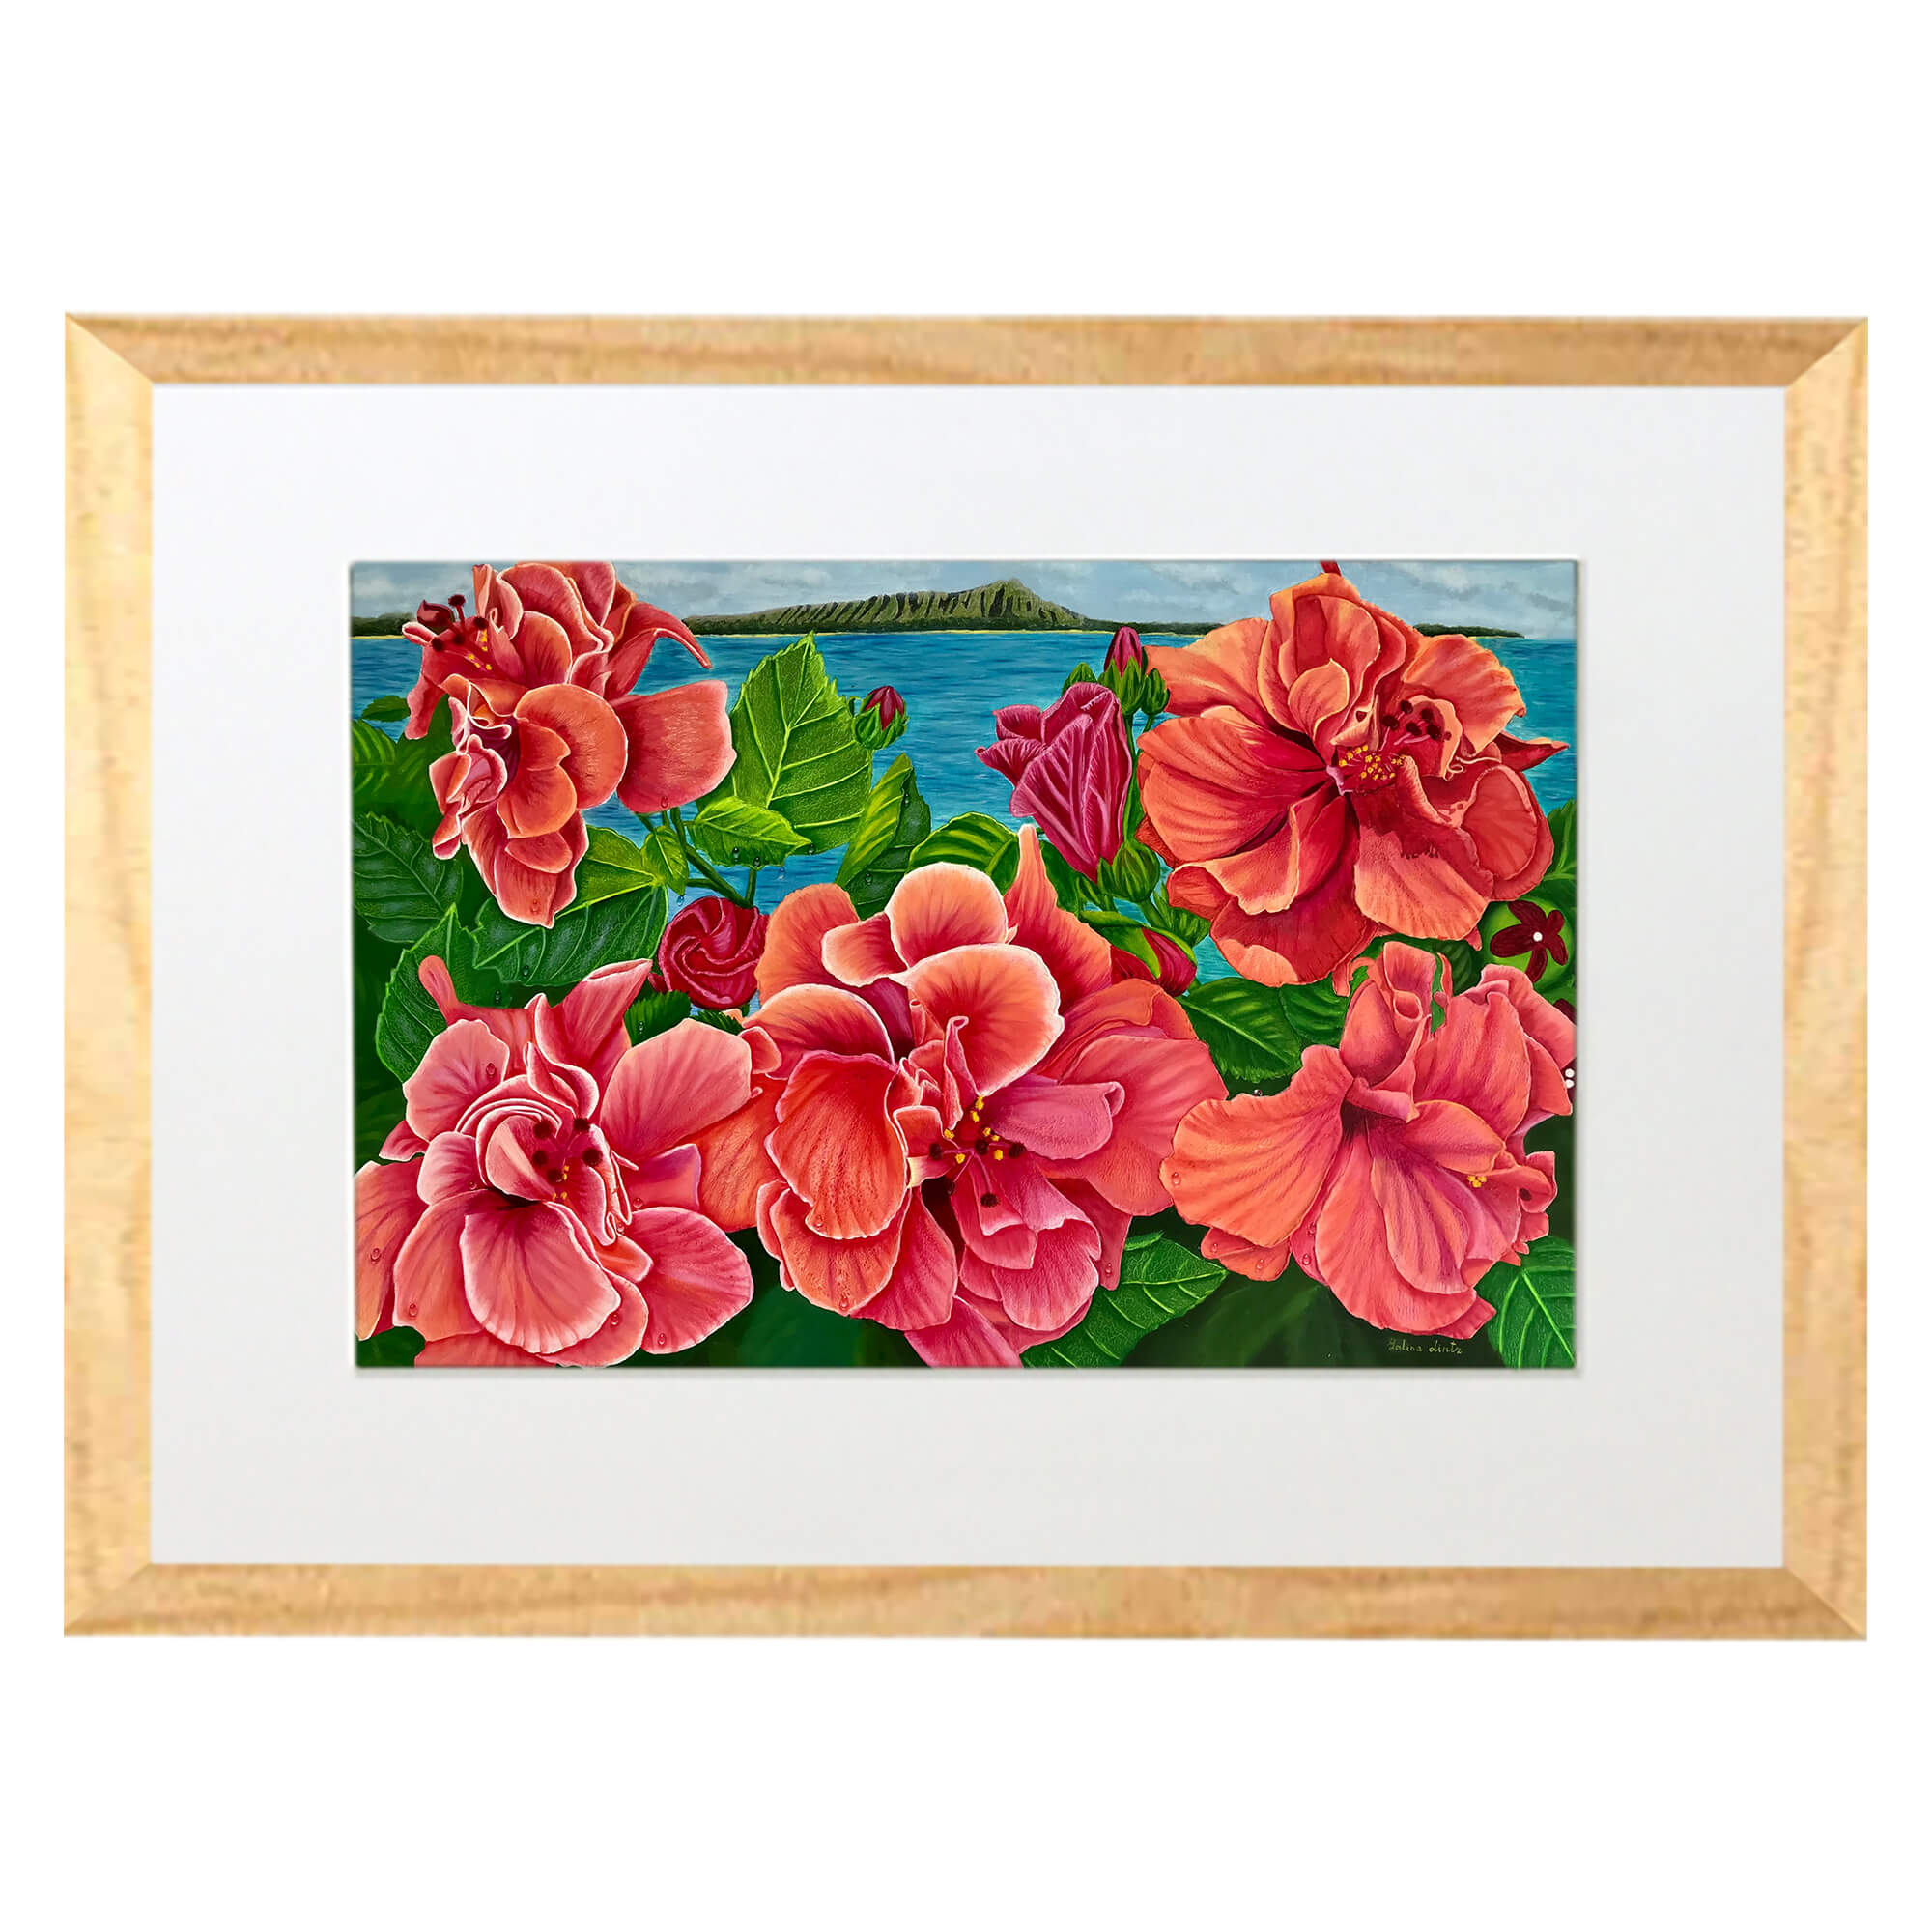 Matted art print with wood frame showcasing a blooming flower by hawaii artist  Galina Lintz